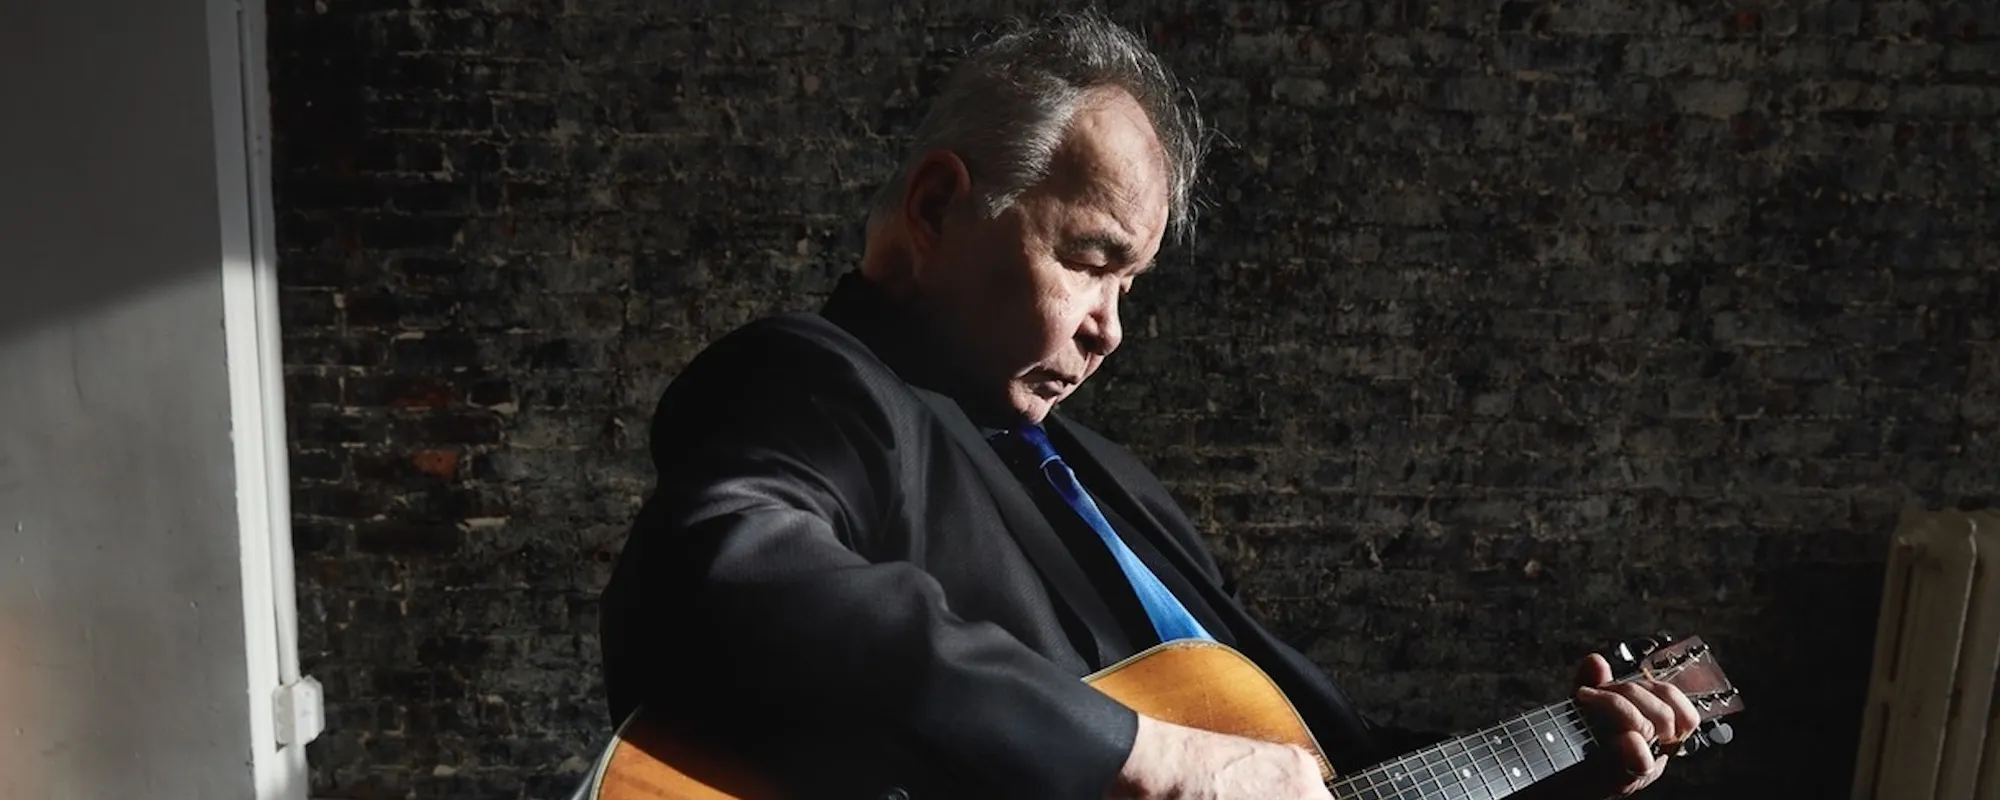 Holly Gleason’s New Book ‘Prine on Prine’ Gets to the Heart of Who John Prine Was Through Interviews and Stories